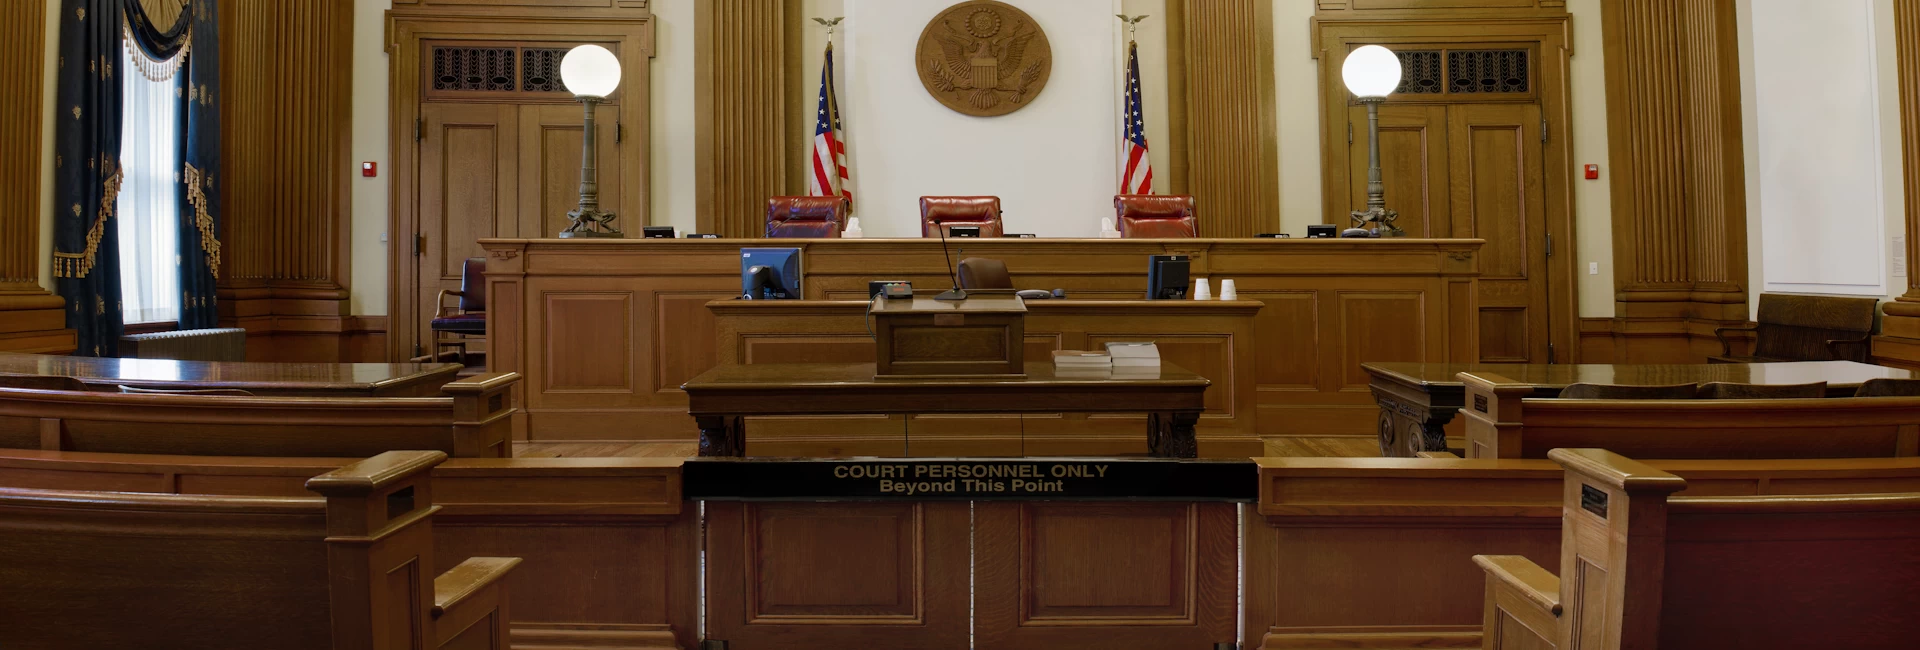 Federal Court of Appeals Courtroom facing bench, with two American Flags and eagle emblem. With the title Attorney written on top.